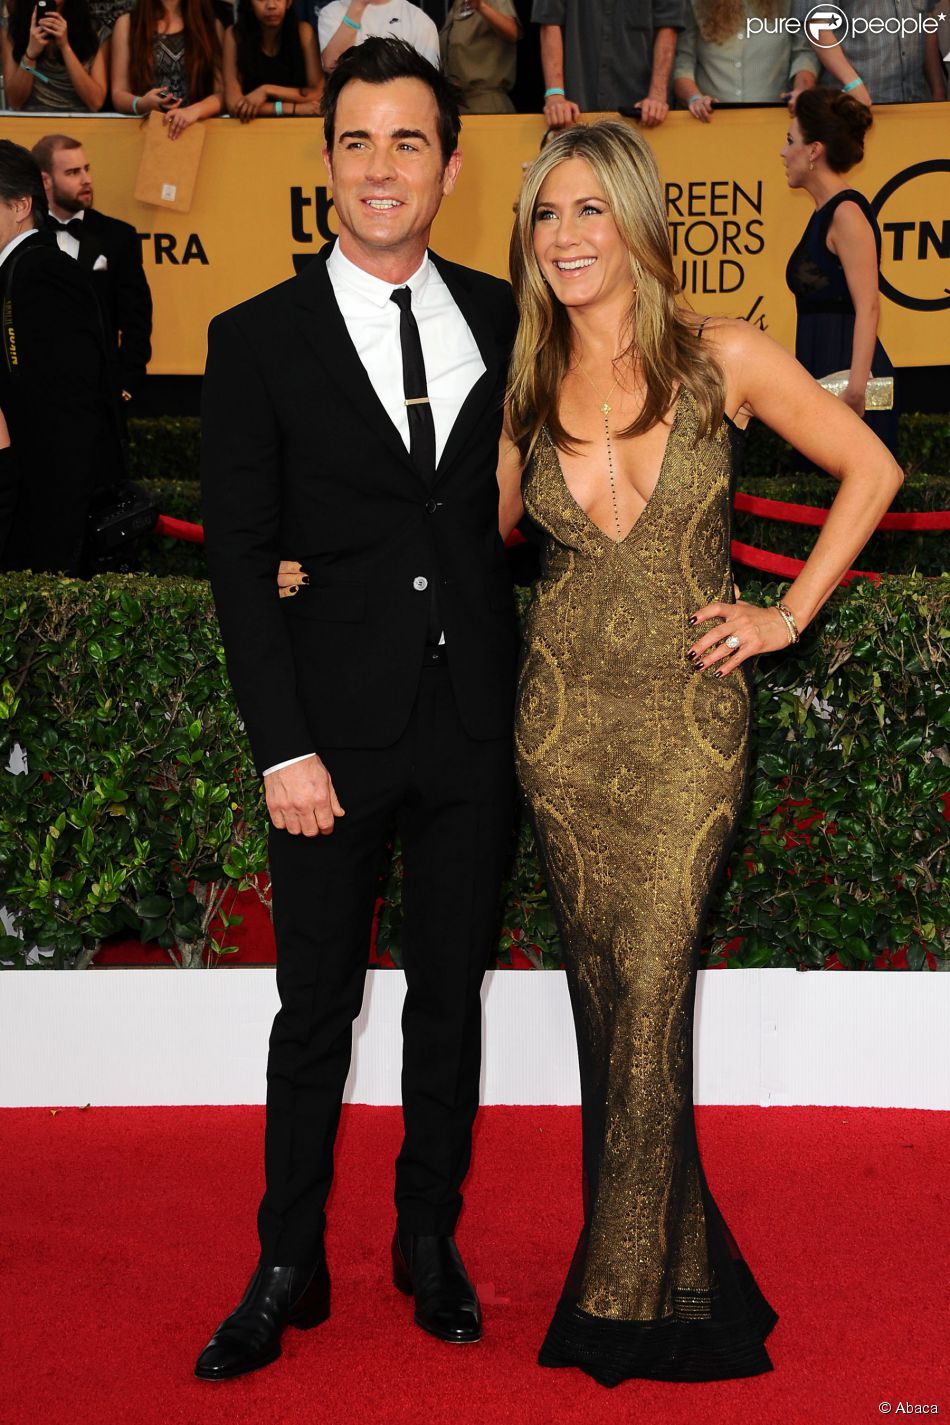 Justin Theroux, Jennifer Aniston attending the 21st Annual Screen Actors Guild Awards at the Shrine Auditorium in Los Angeles, CA, USA, on January 25, 2015. Photo by Kyle Rover/Startraks/ABACAPRESS.COM26/01/2015 - Los Angeles